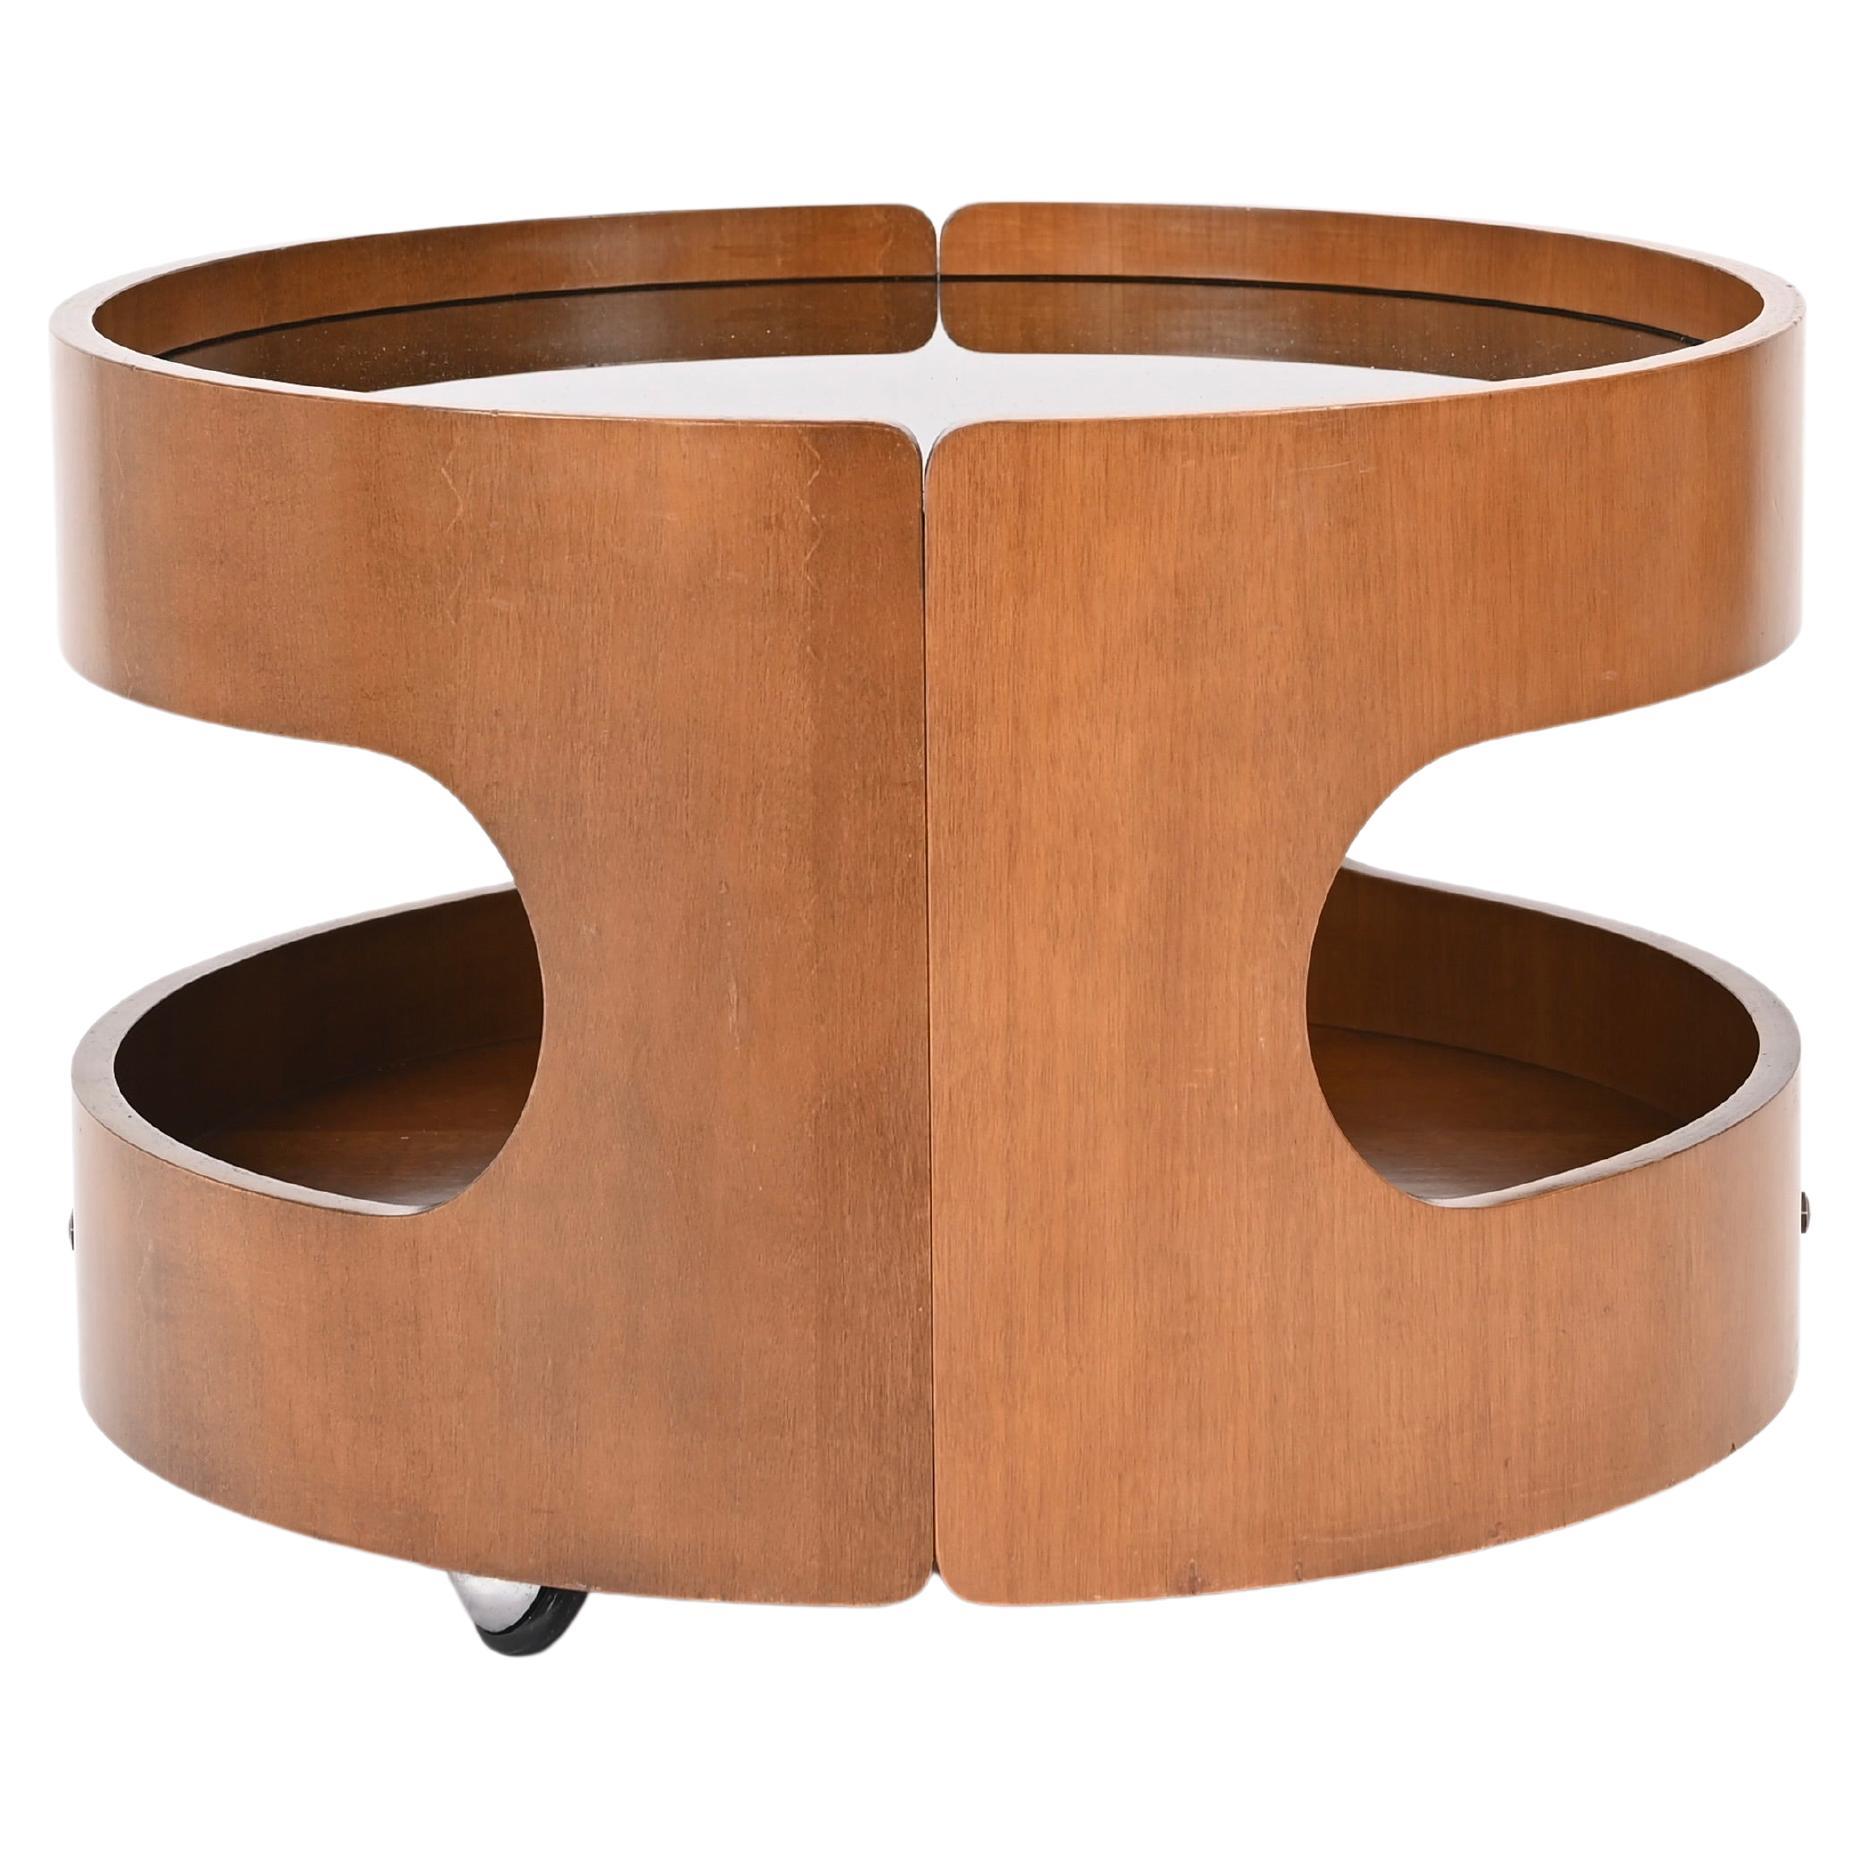 Midcentury Italian Bent Plywood Coffee Table with Wheels by Molteni, 1970s For Sale